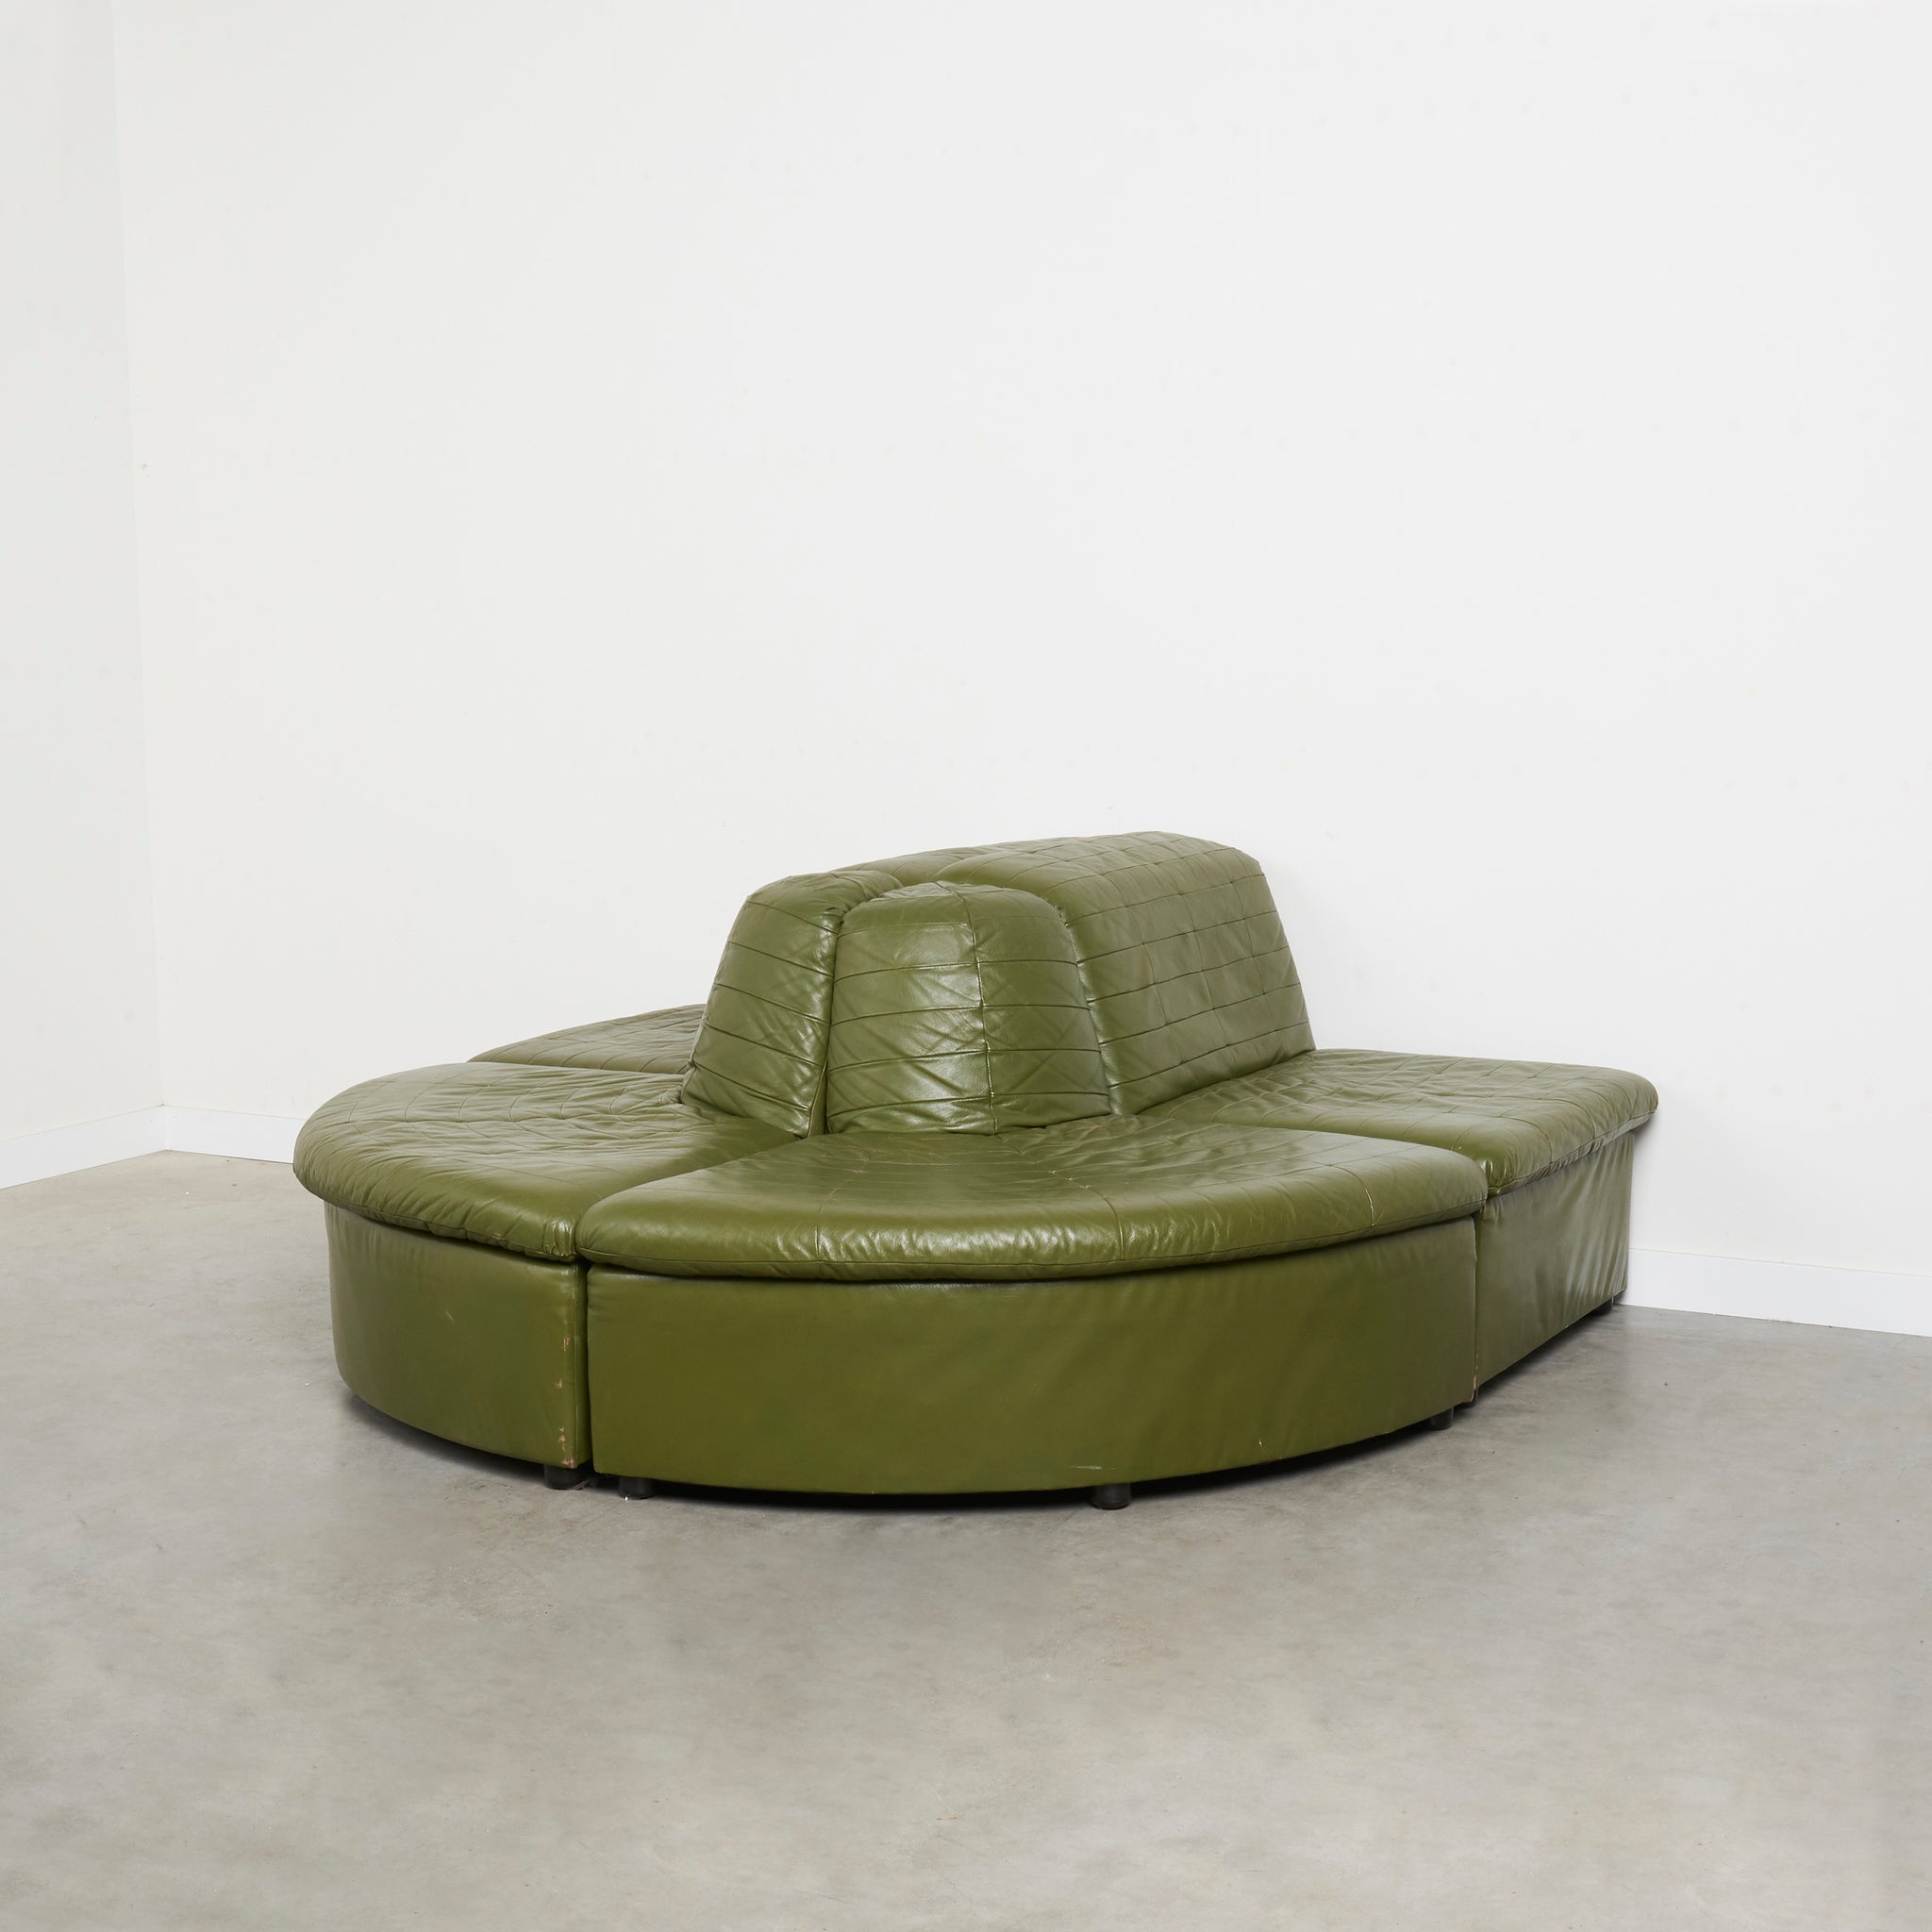 Olive green leather Laauser sofa, 1970s